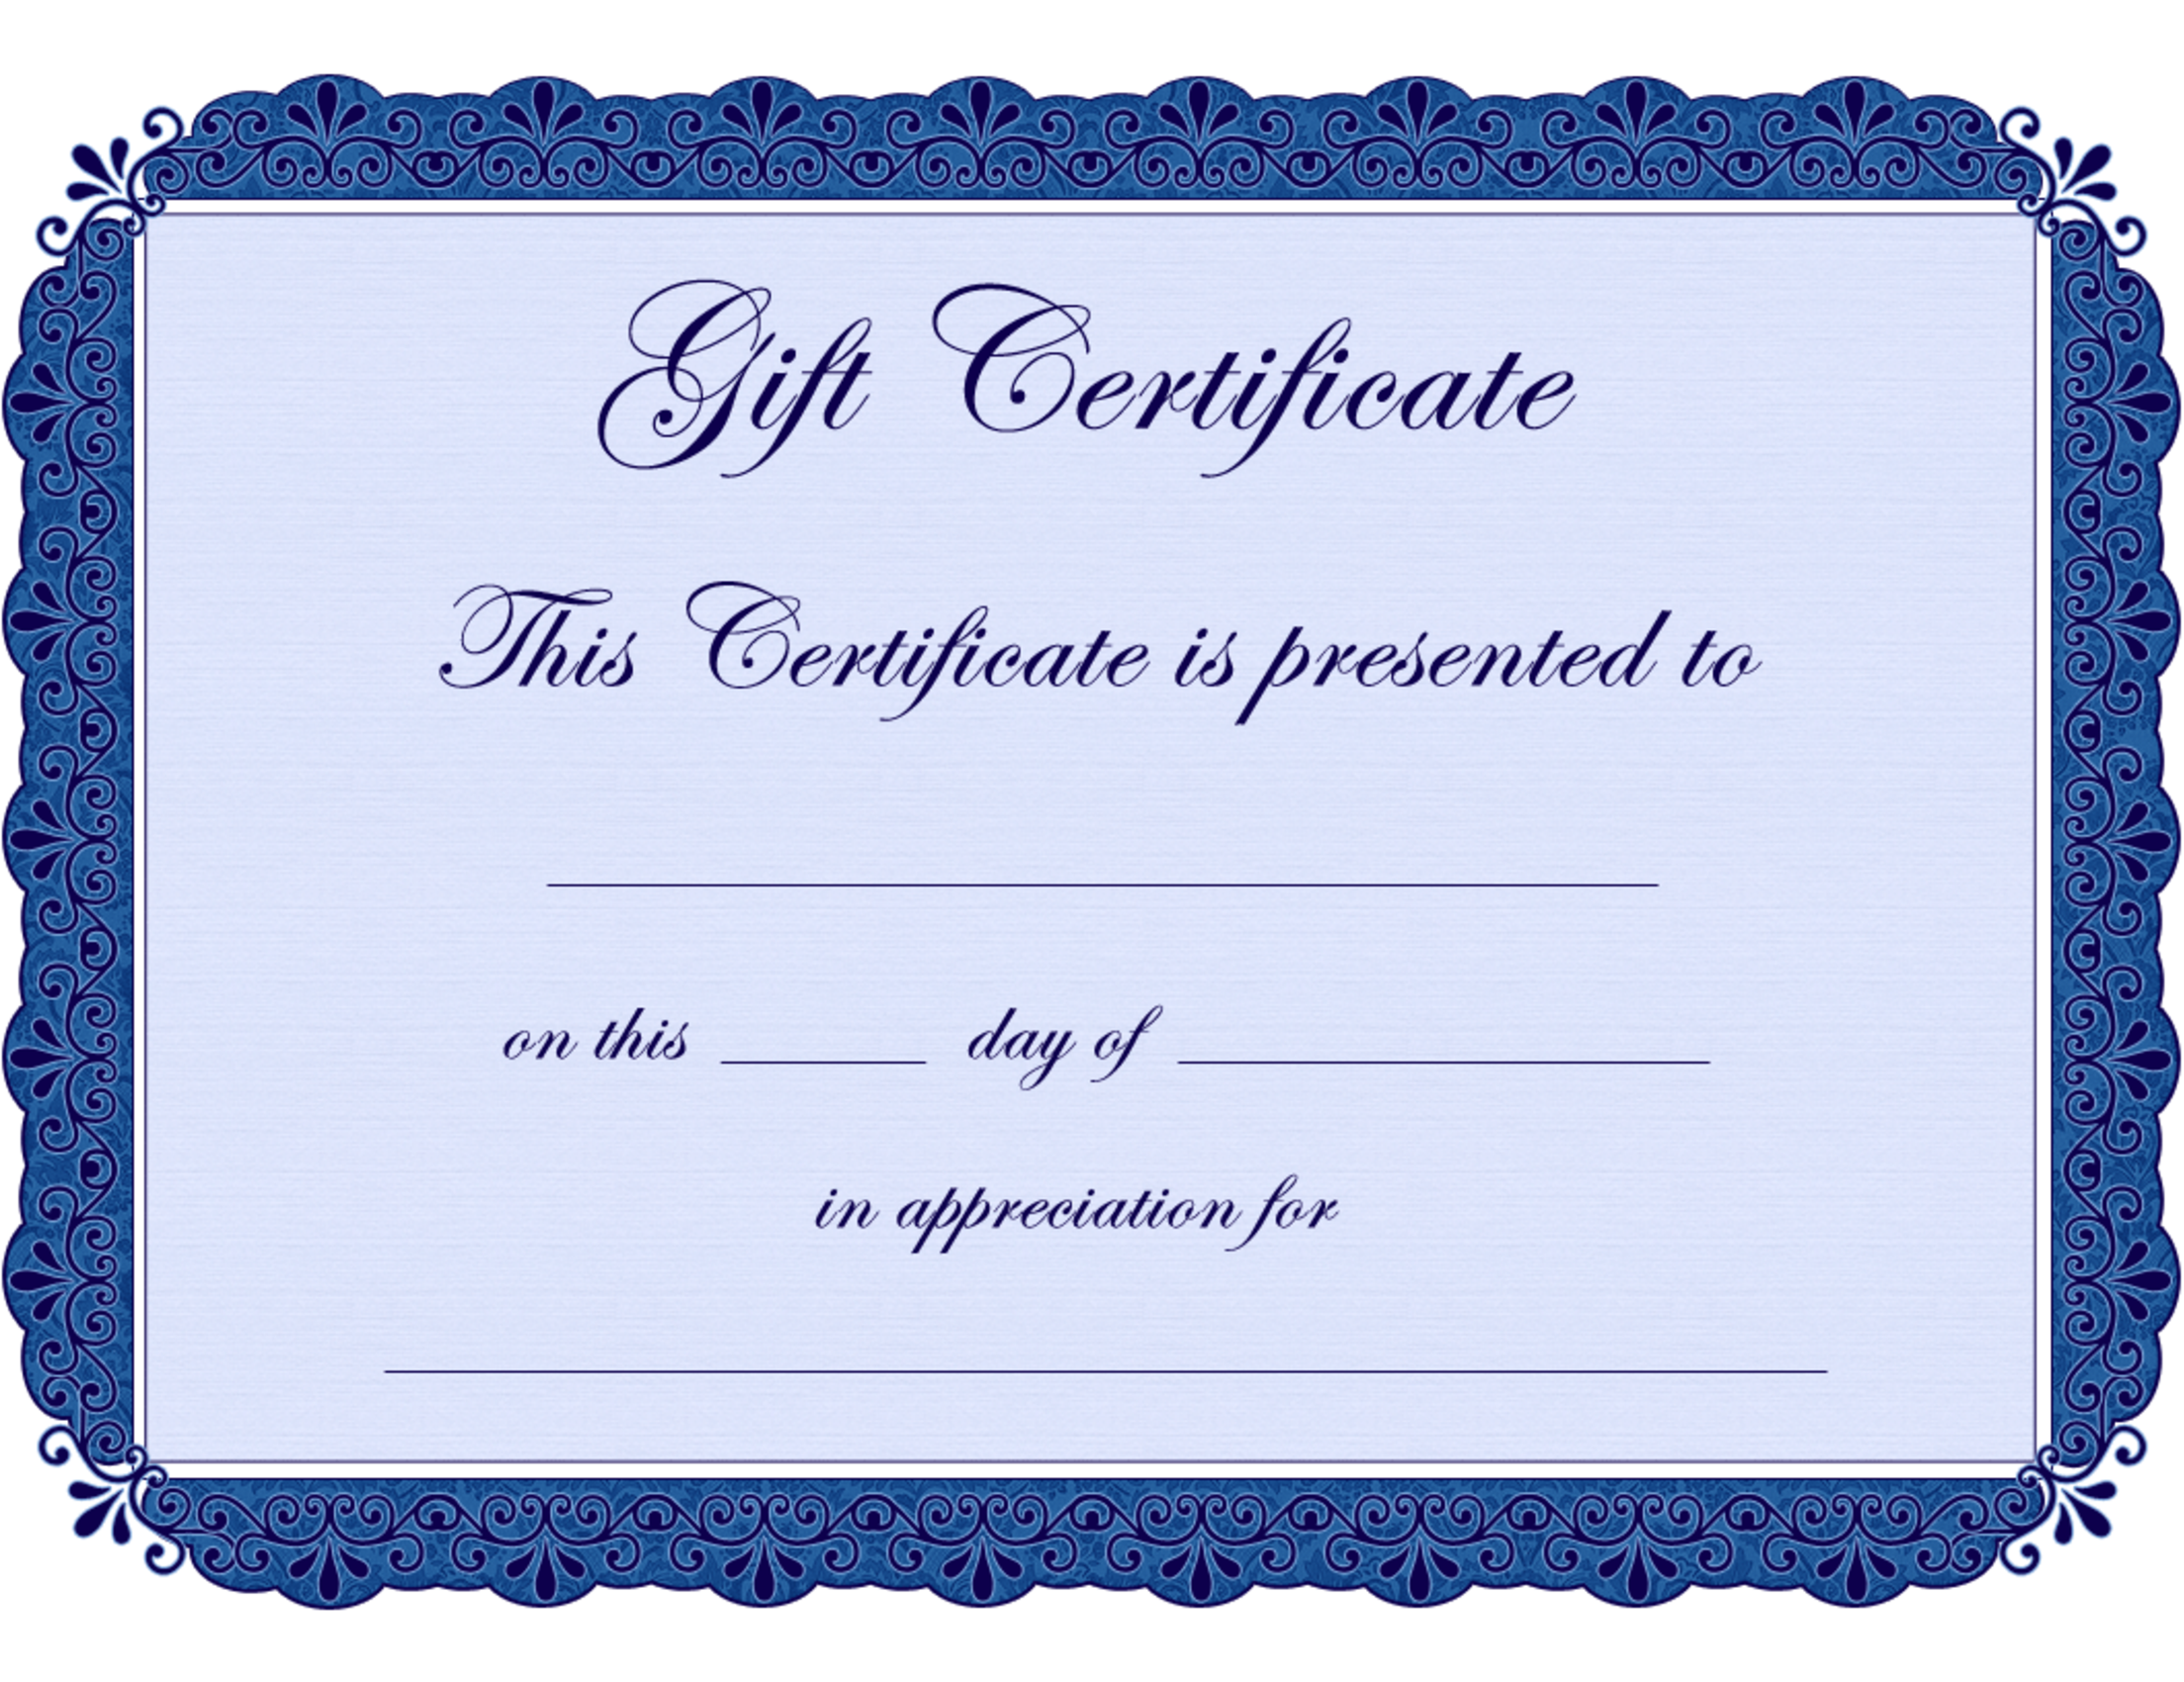 Gift Certificate Templates Gift Certificate Templates 5